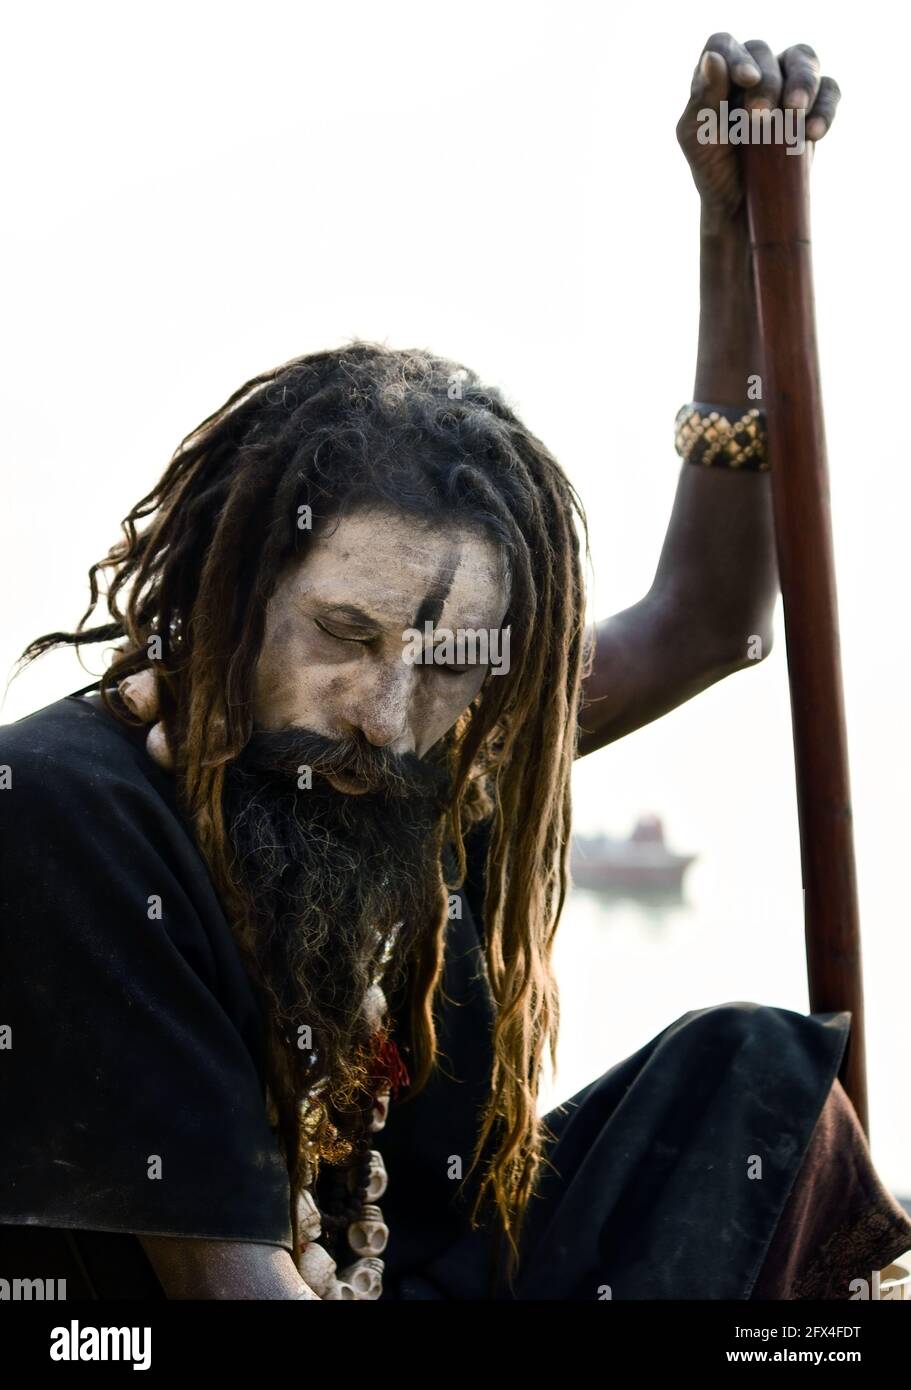 Varanasi, India - November 01, 2016: Portrait of a hindu bearded sadhu, pilgrim or Aghori baba in black cloths with closed eyes sitting with a stick a Stock Photo